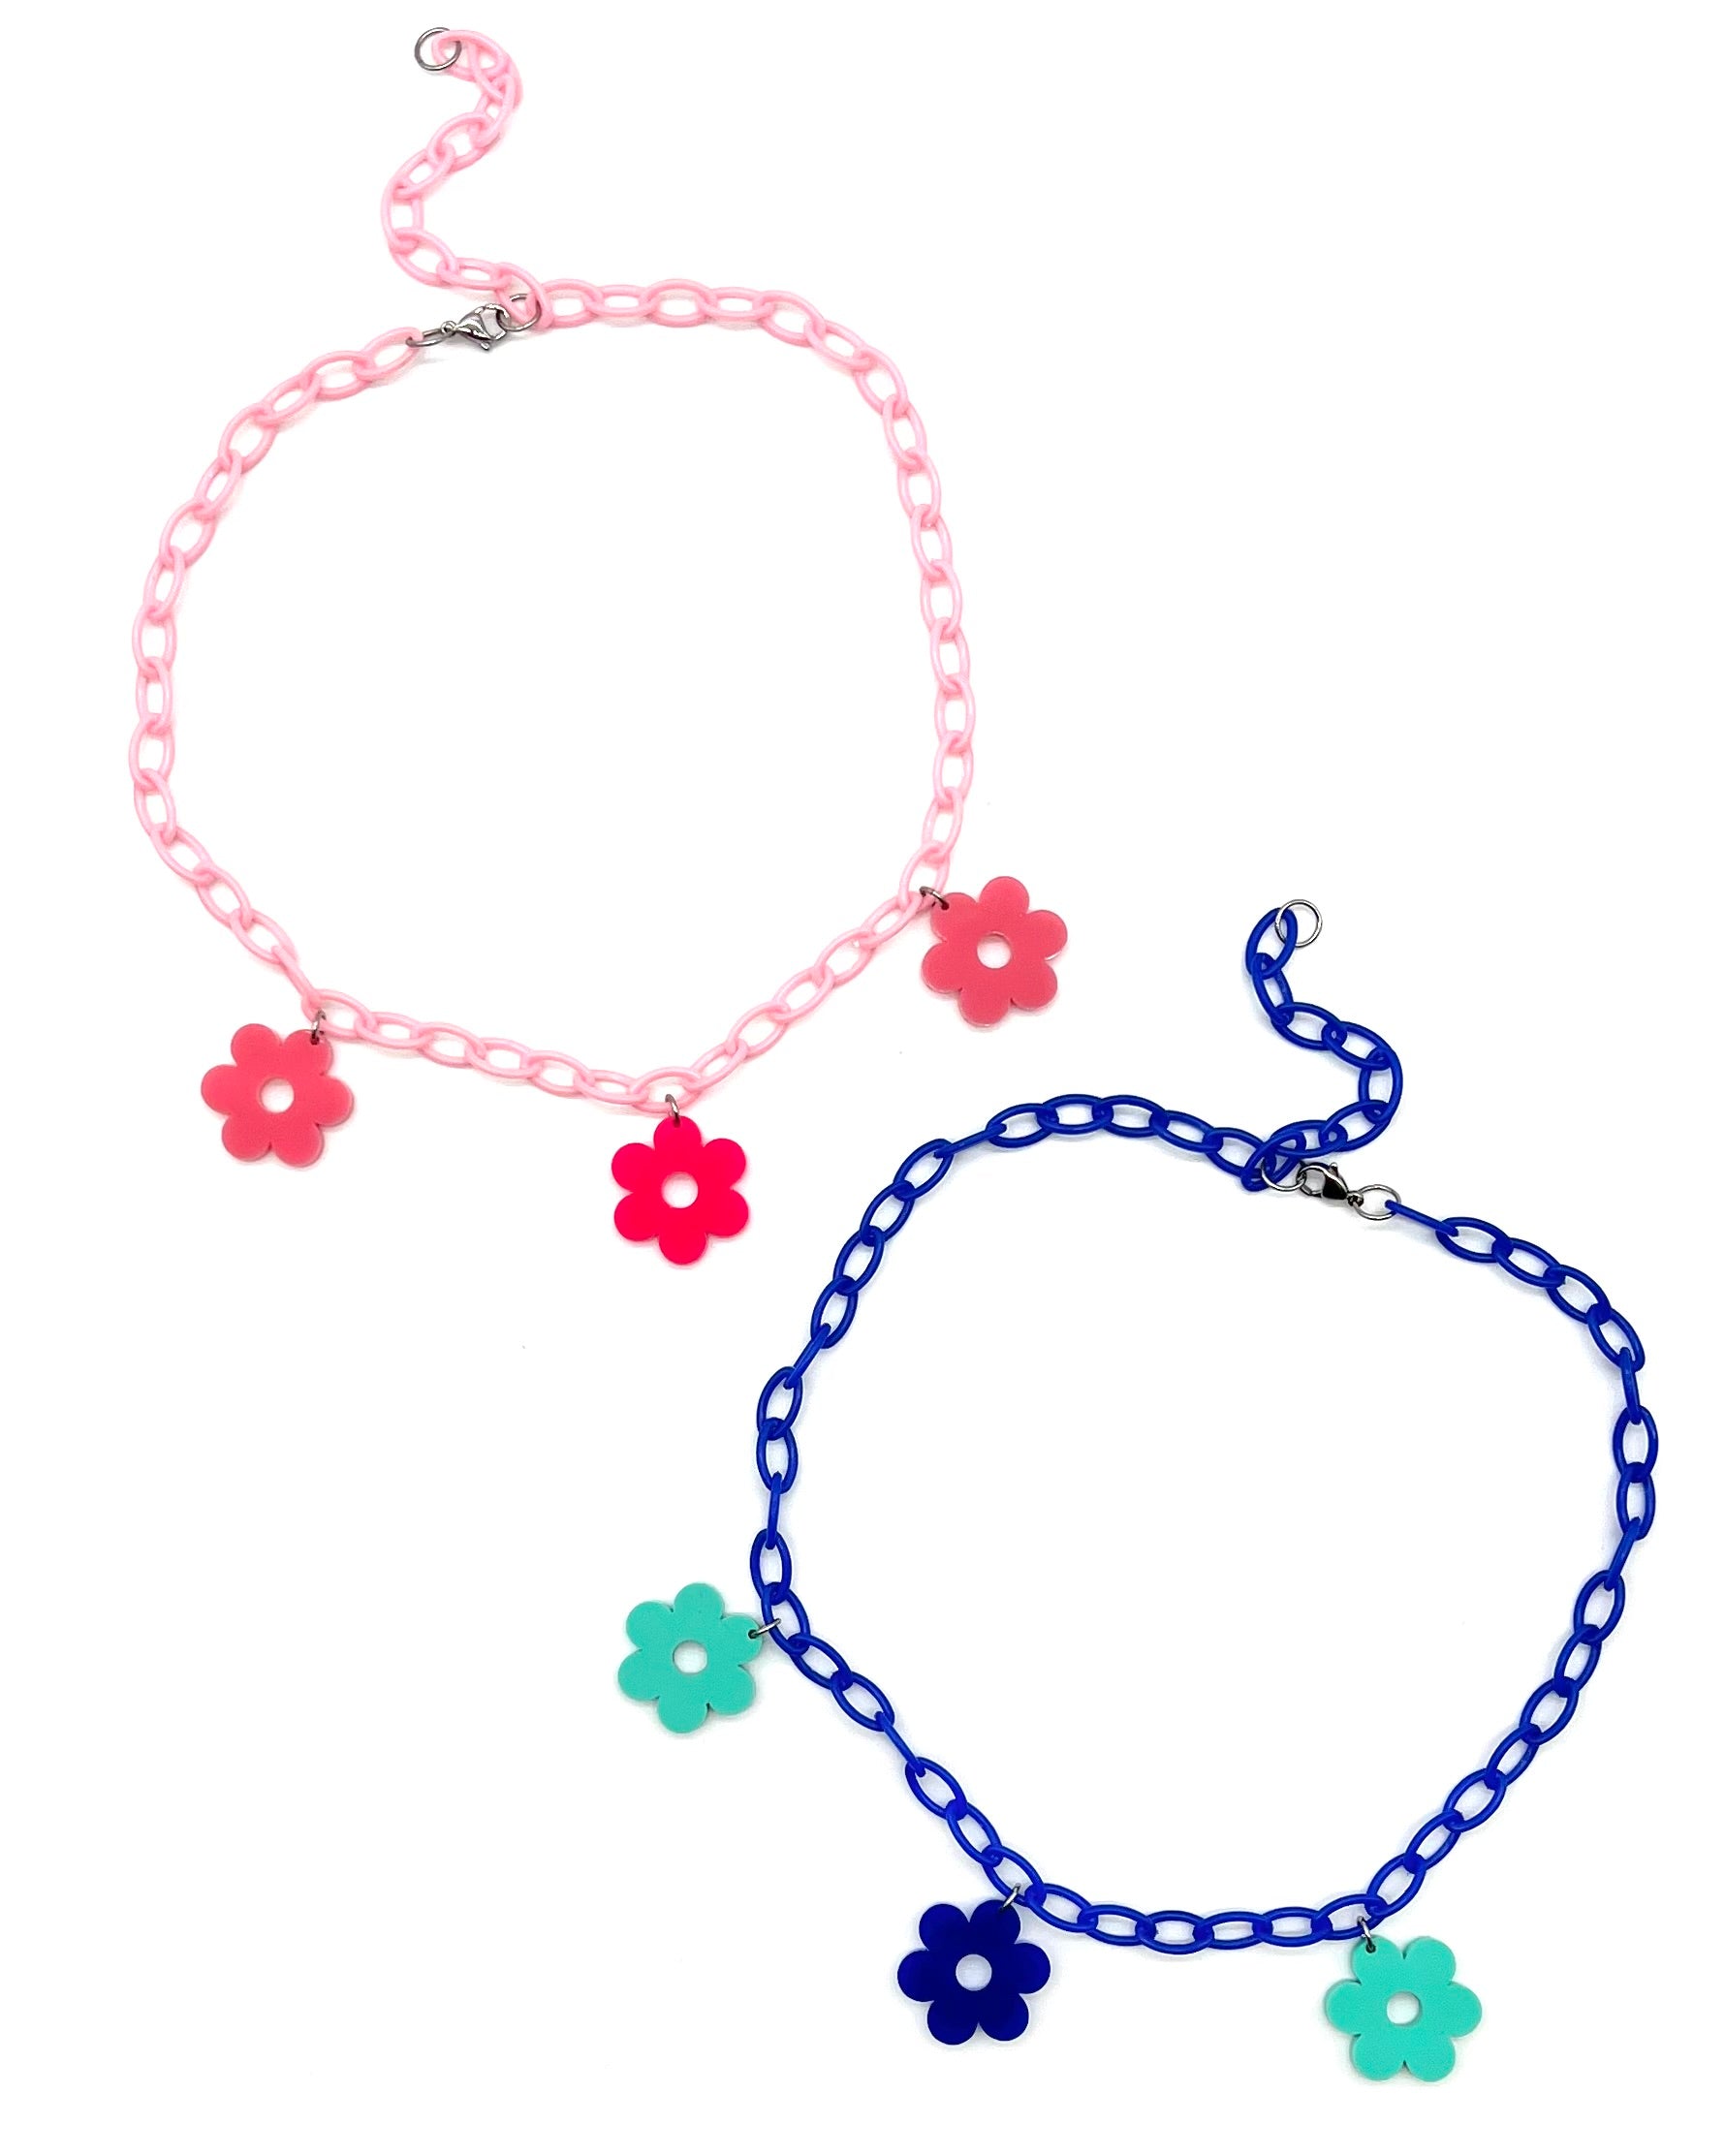 The Flower Power Pink and Flower Power Blue choker displayed on a white background.